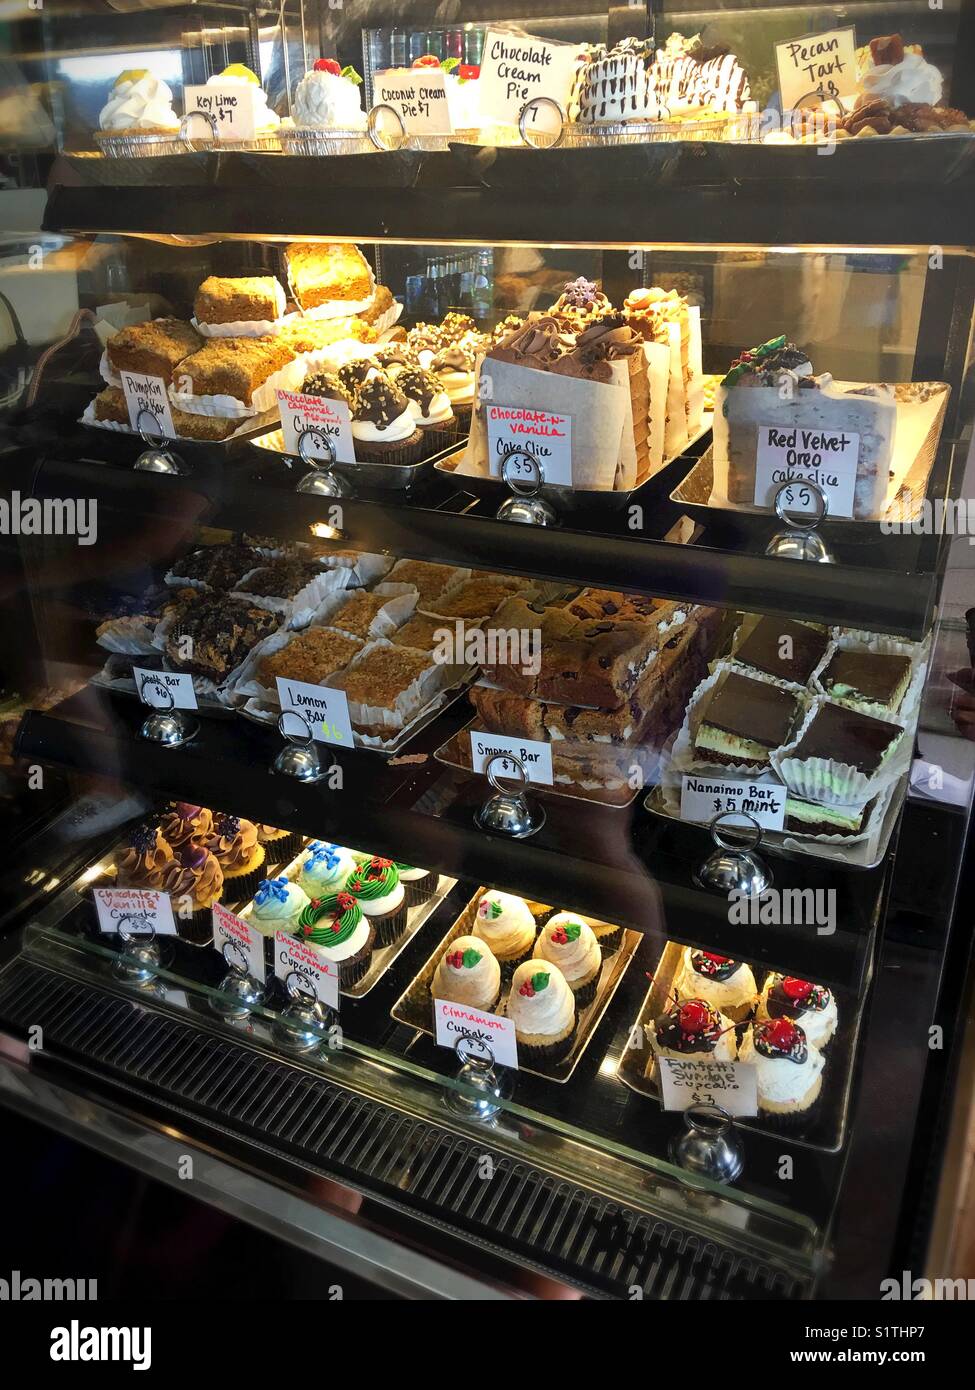 Vegan pastries in a display case at Valhalla Bakery in Orlando, Florida, USA. Stock Photo